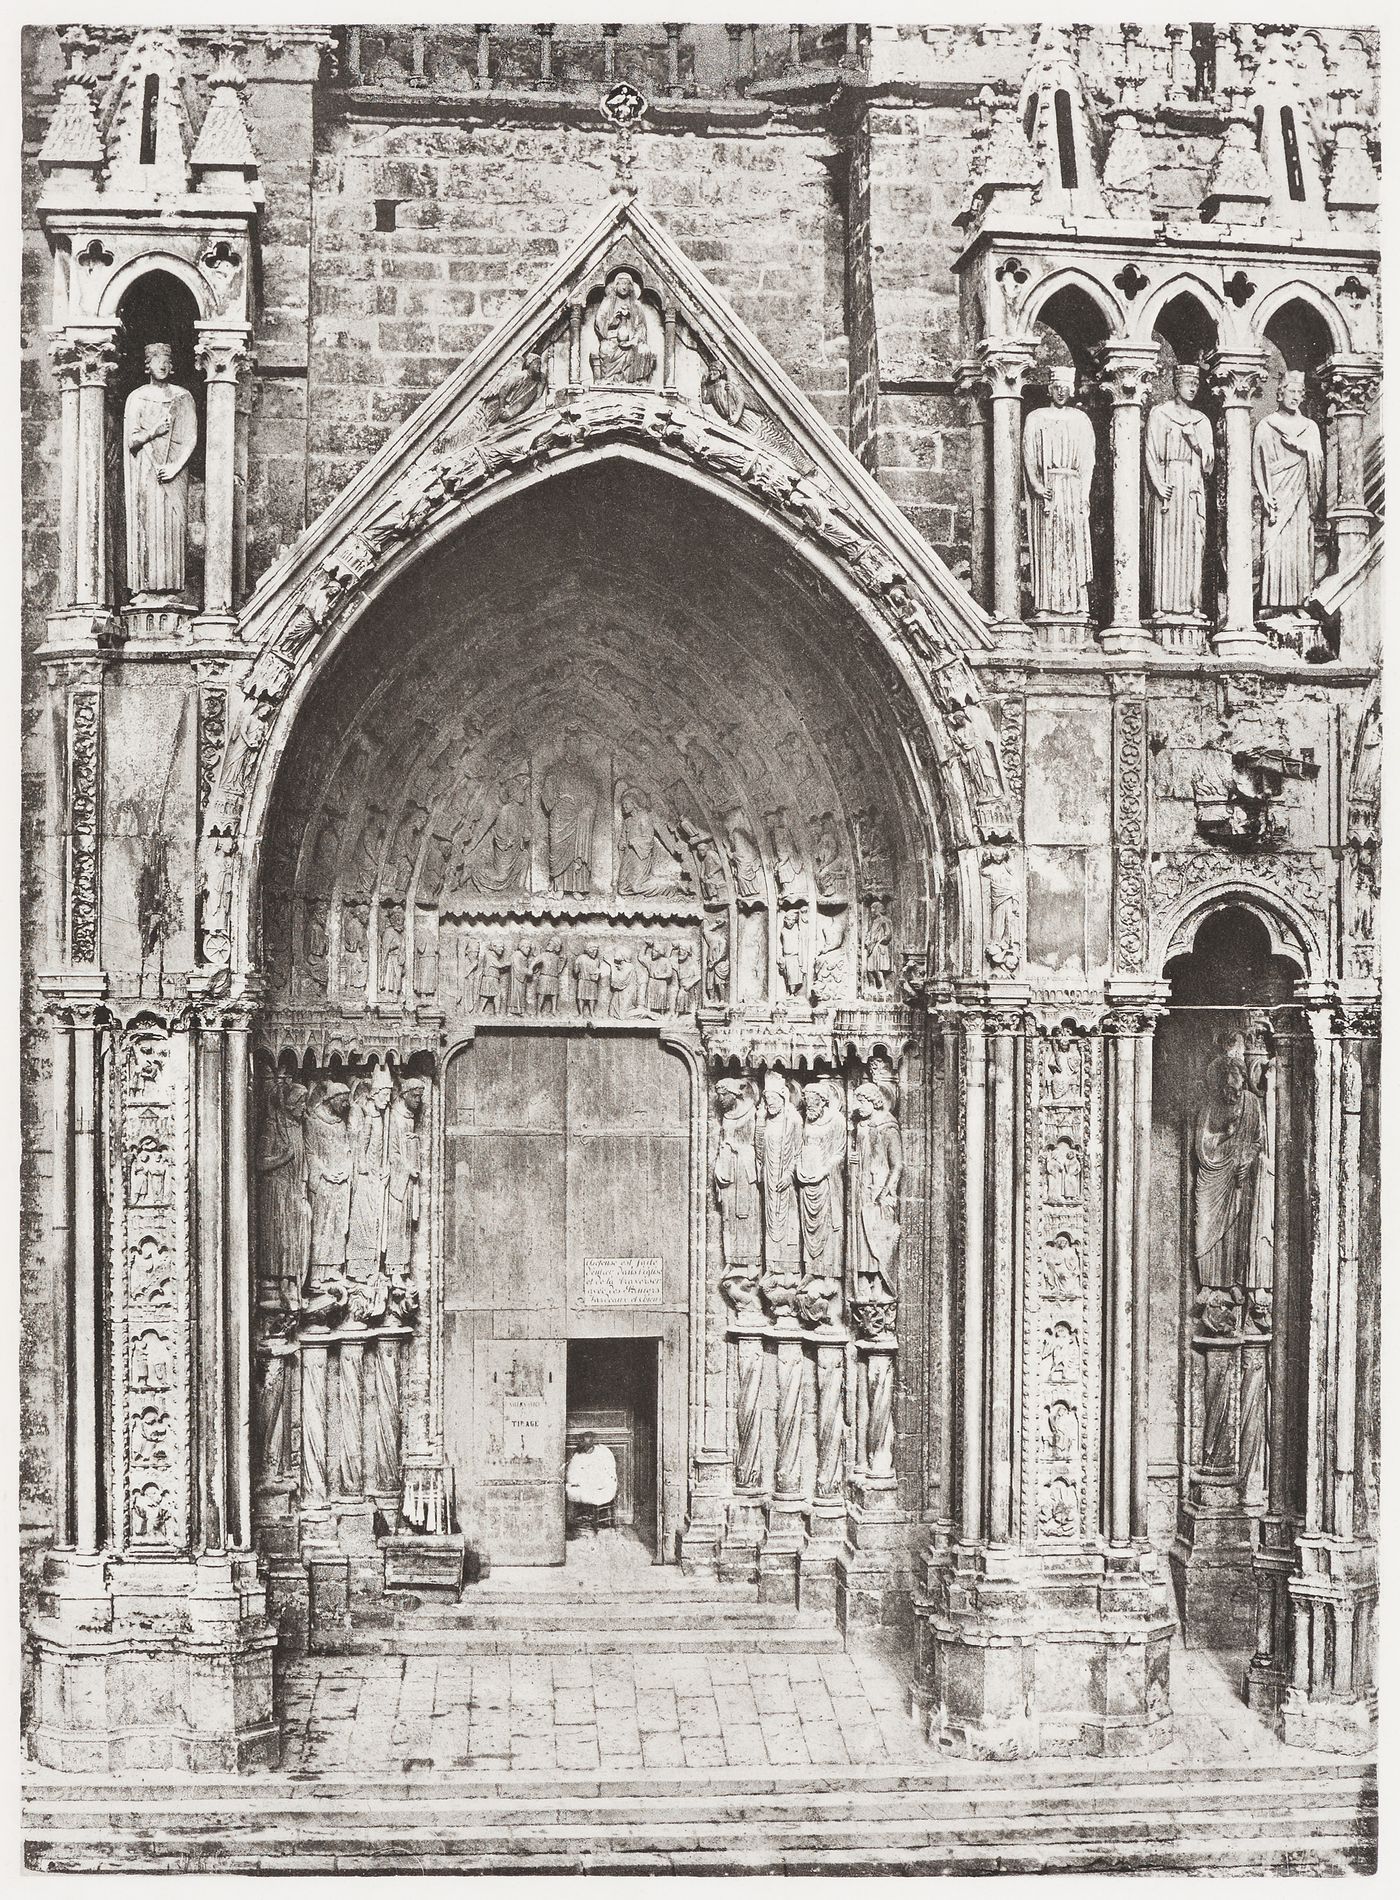 South Transept Porch, Left Portal, Chartres Cathedral, France